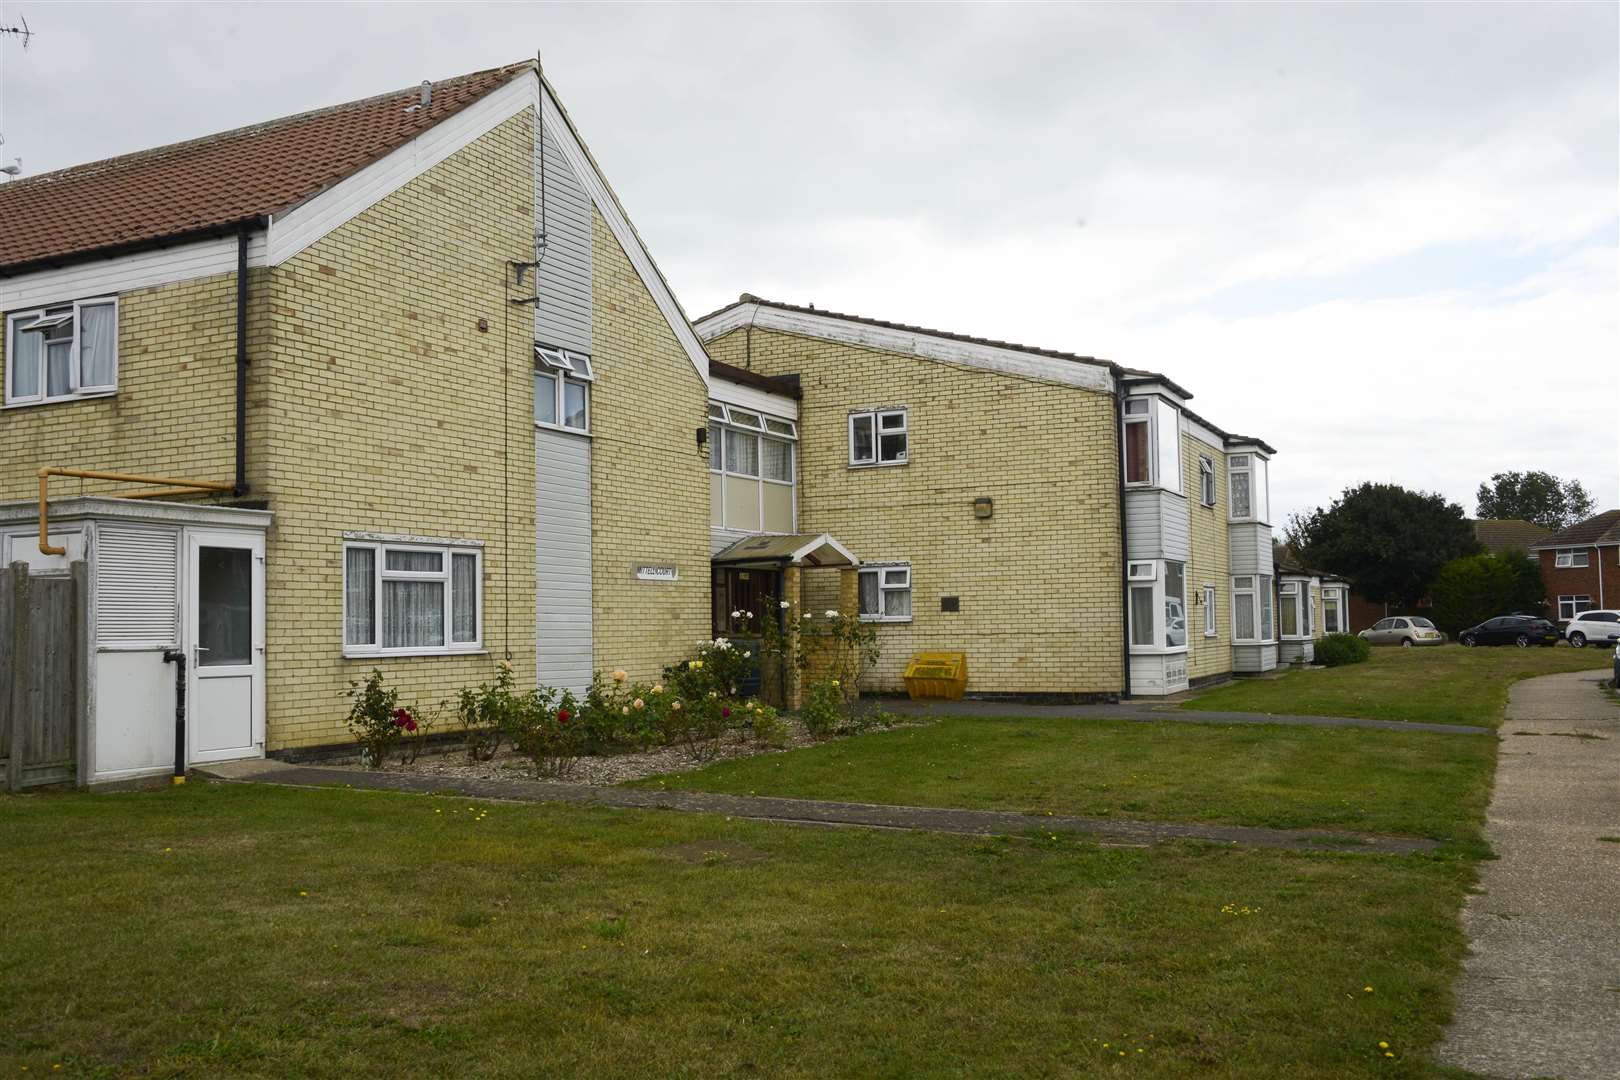 The heating issues are also affecting communal areas at Mittell Court in Lydd. Picture: Paul Amos